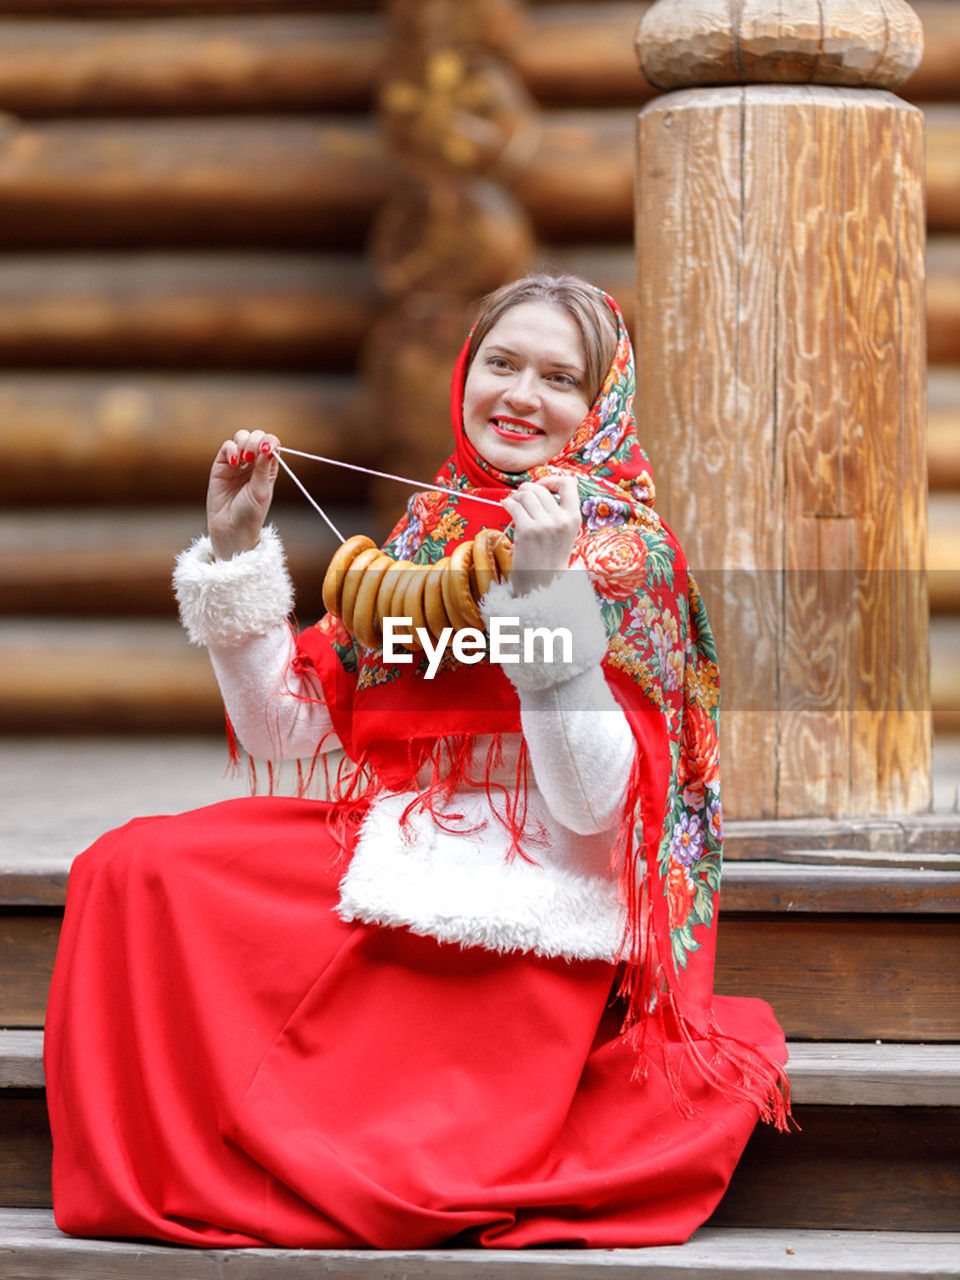 one person, smiling, women, clothing, happiness, adult, traditional clothing, red, architecture, portrait, person, tradition, female, cheerful, sitting, lifestyles, emotion, looking at camera, holding, celebration, young adult, full length, child, childhood, staircase, outdoors, religion, temple - building, event, holiday, human face, history